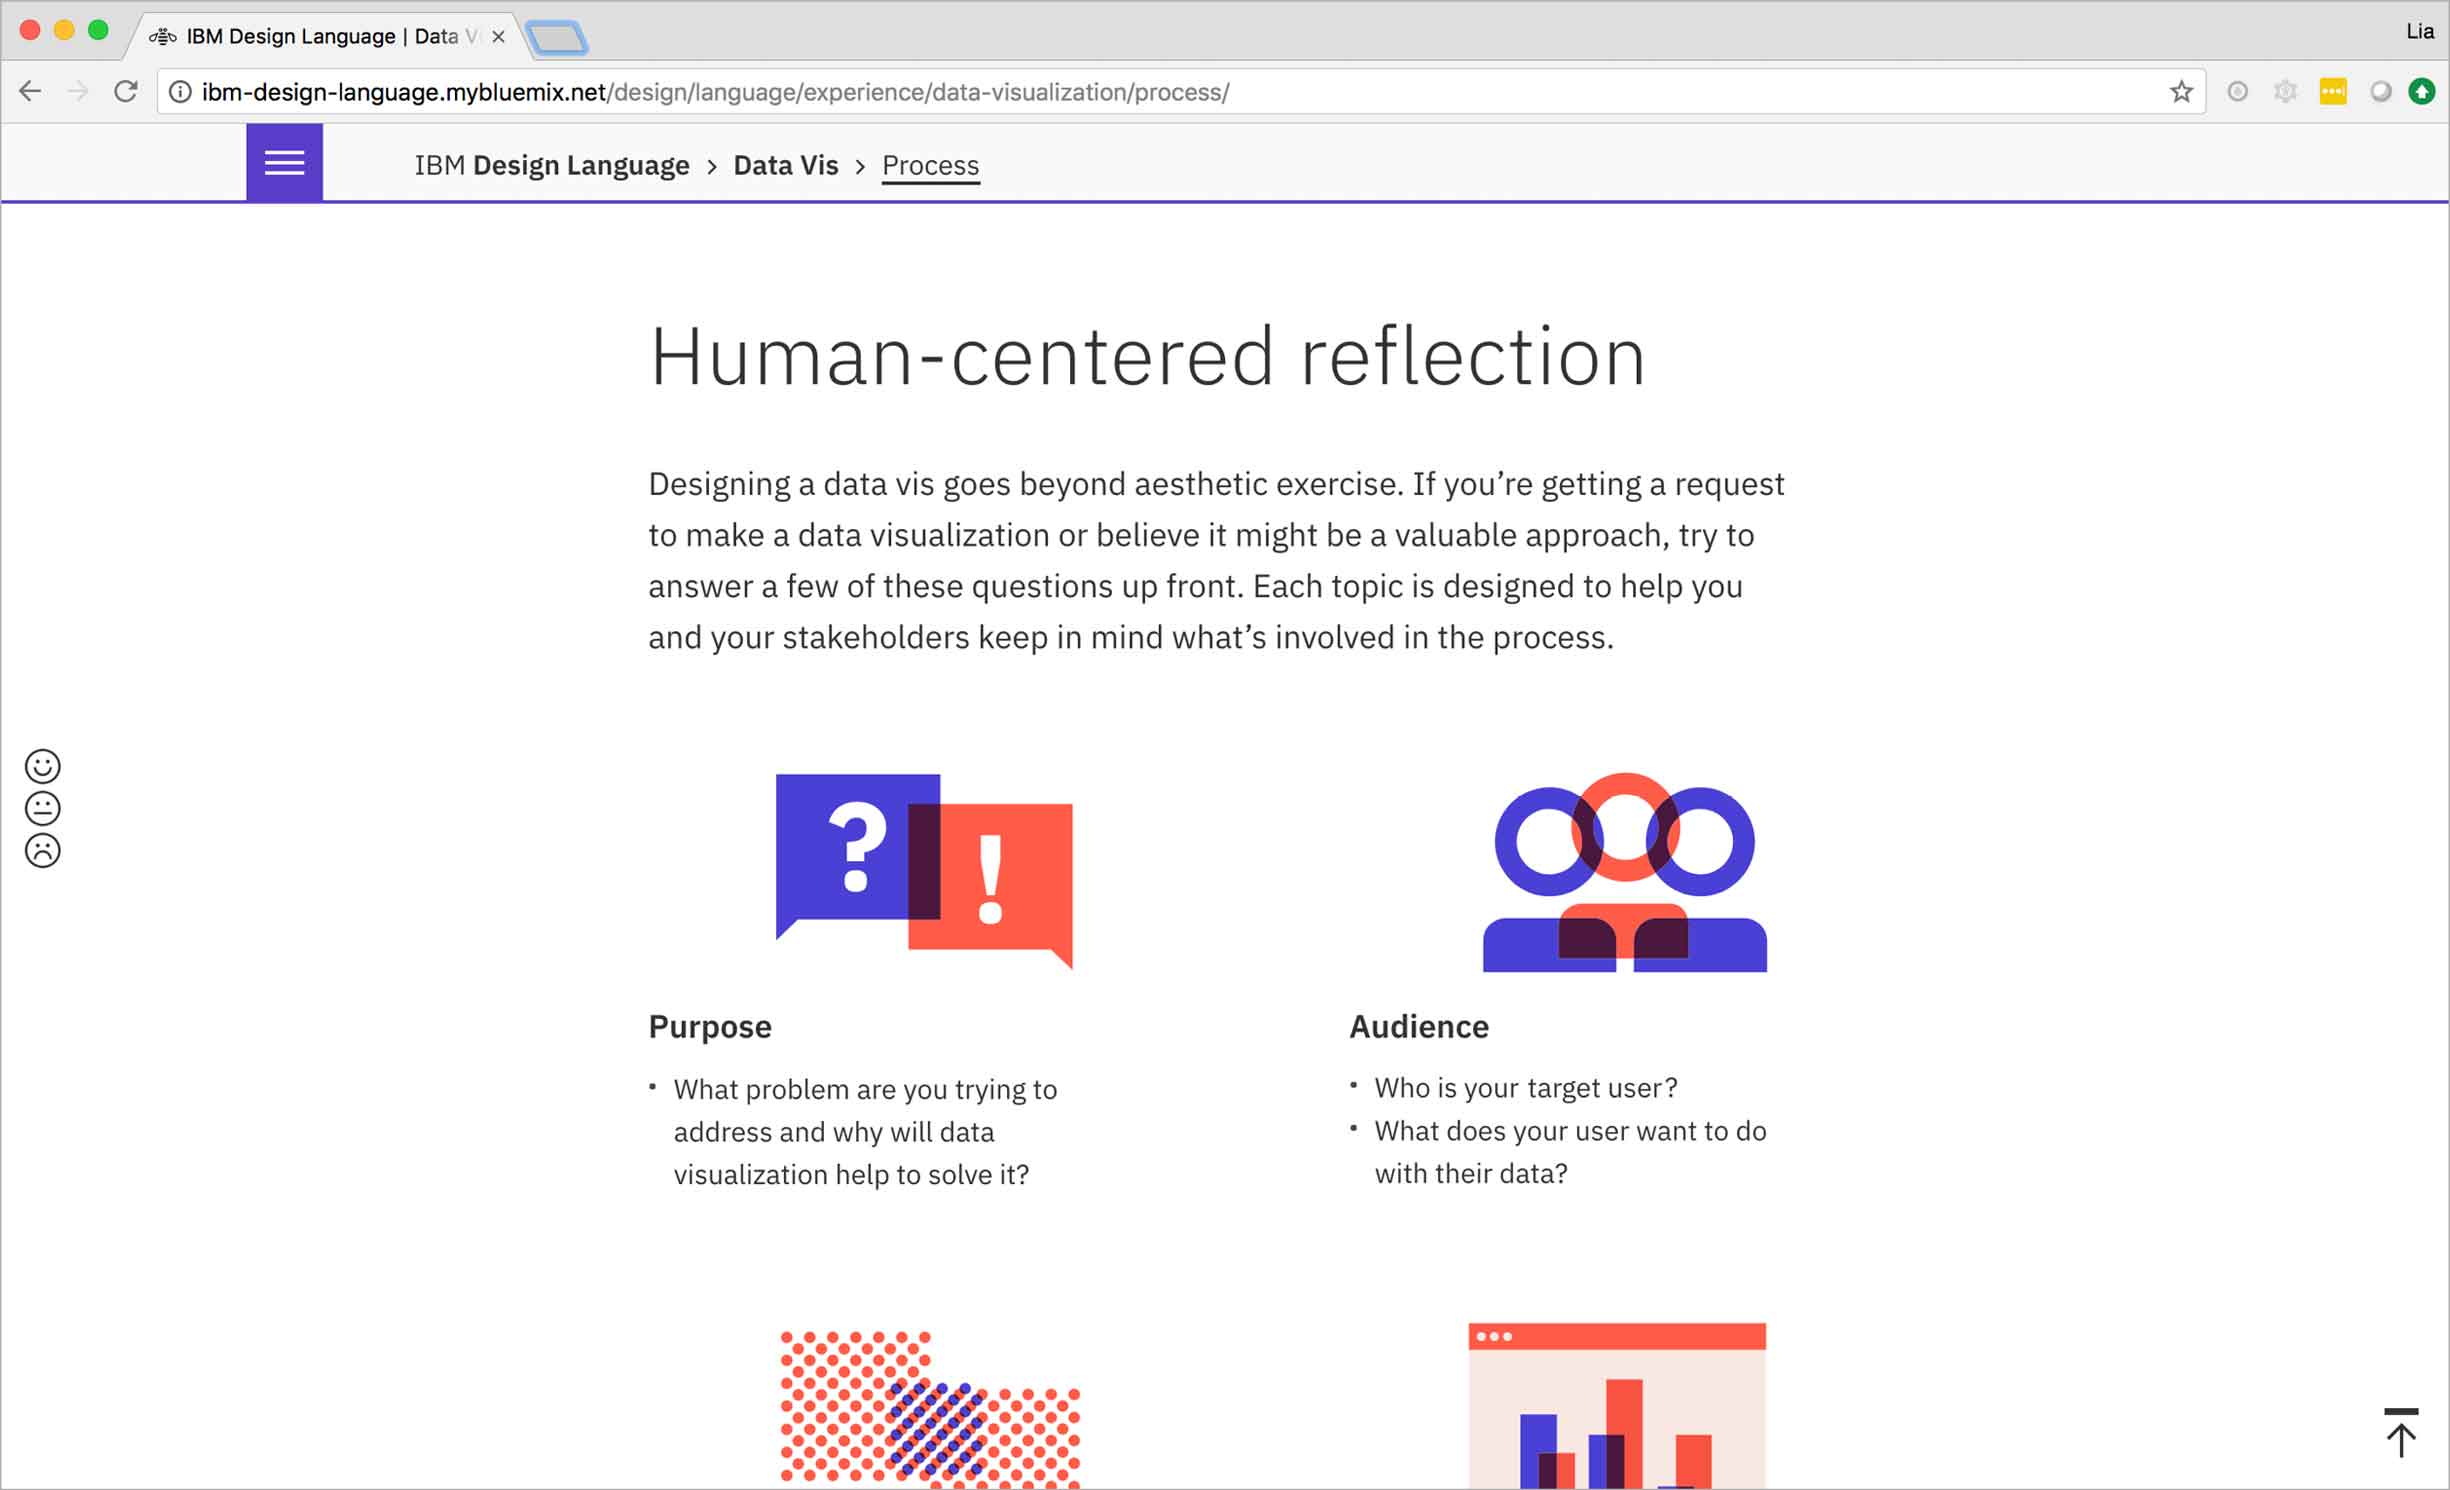 The principles section of the IBM Data Vis Design Language focuses on human-centered reflection.